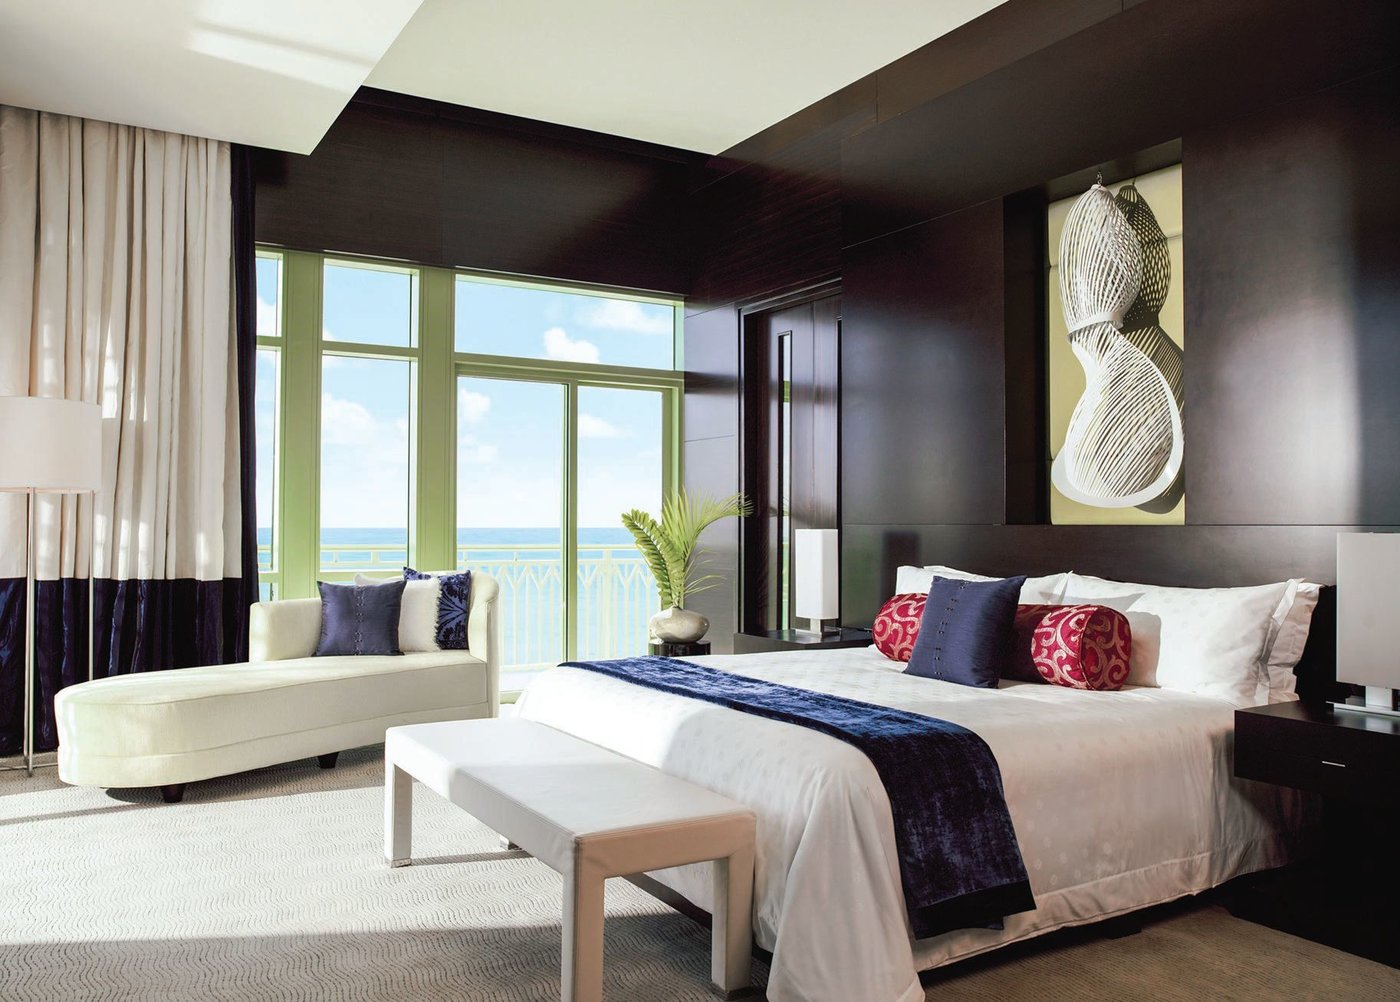 The Penthouse Suite’s primary bedroom offers stunning water views. PHOTO COURTESY OF BRAND